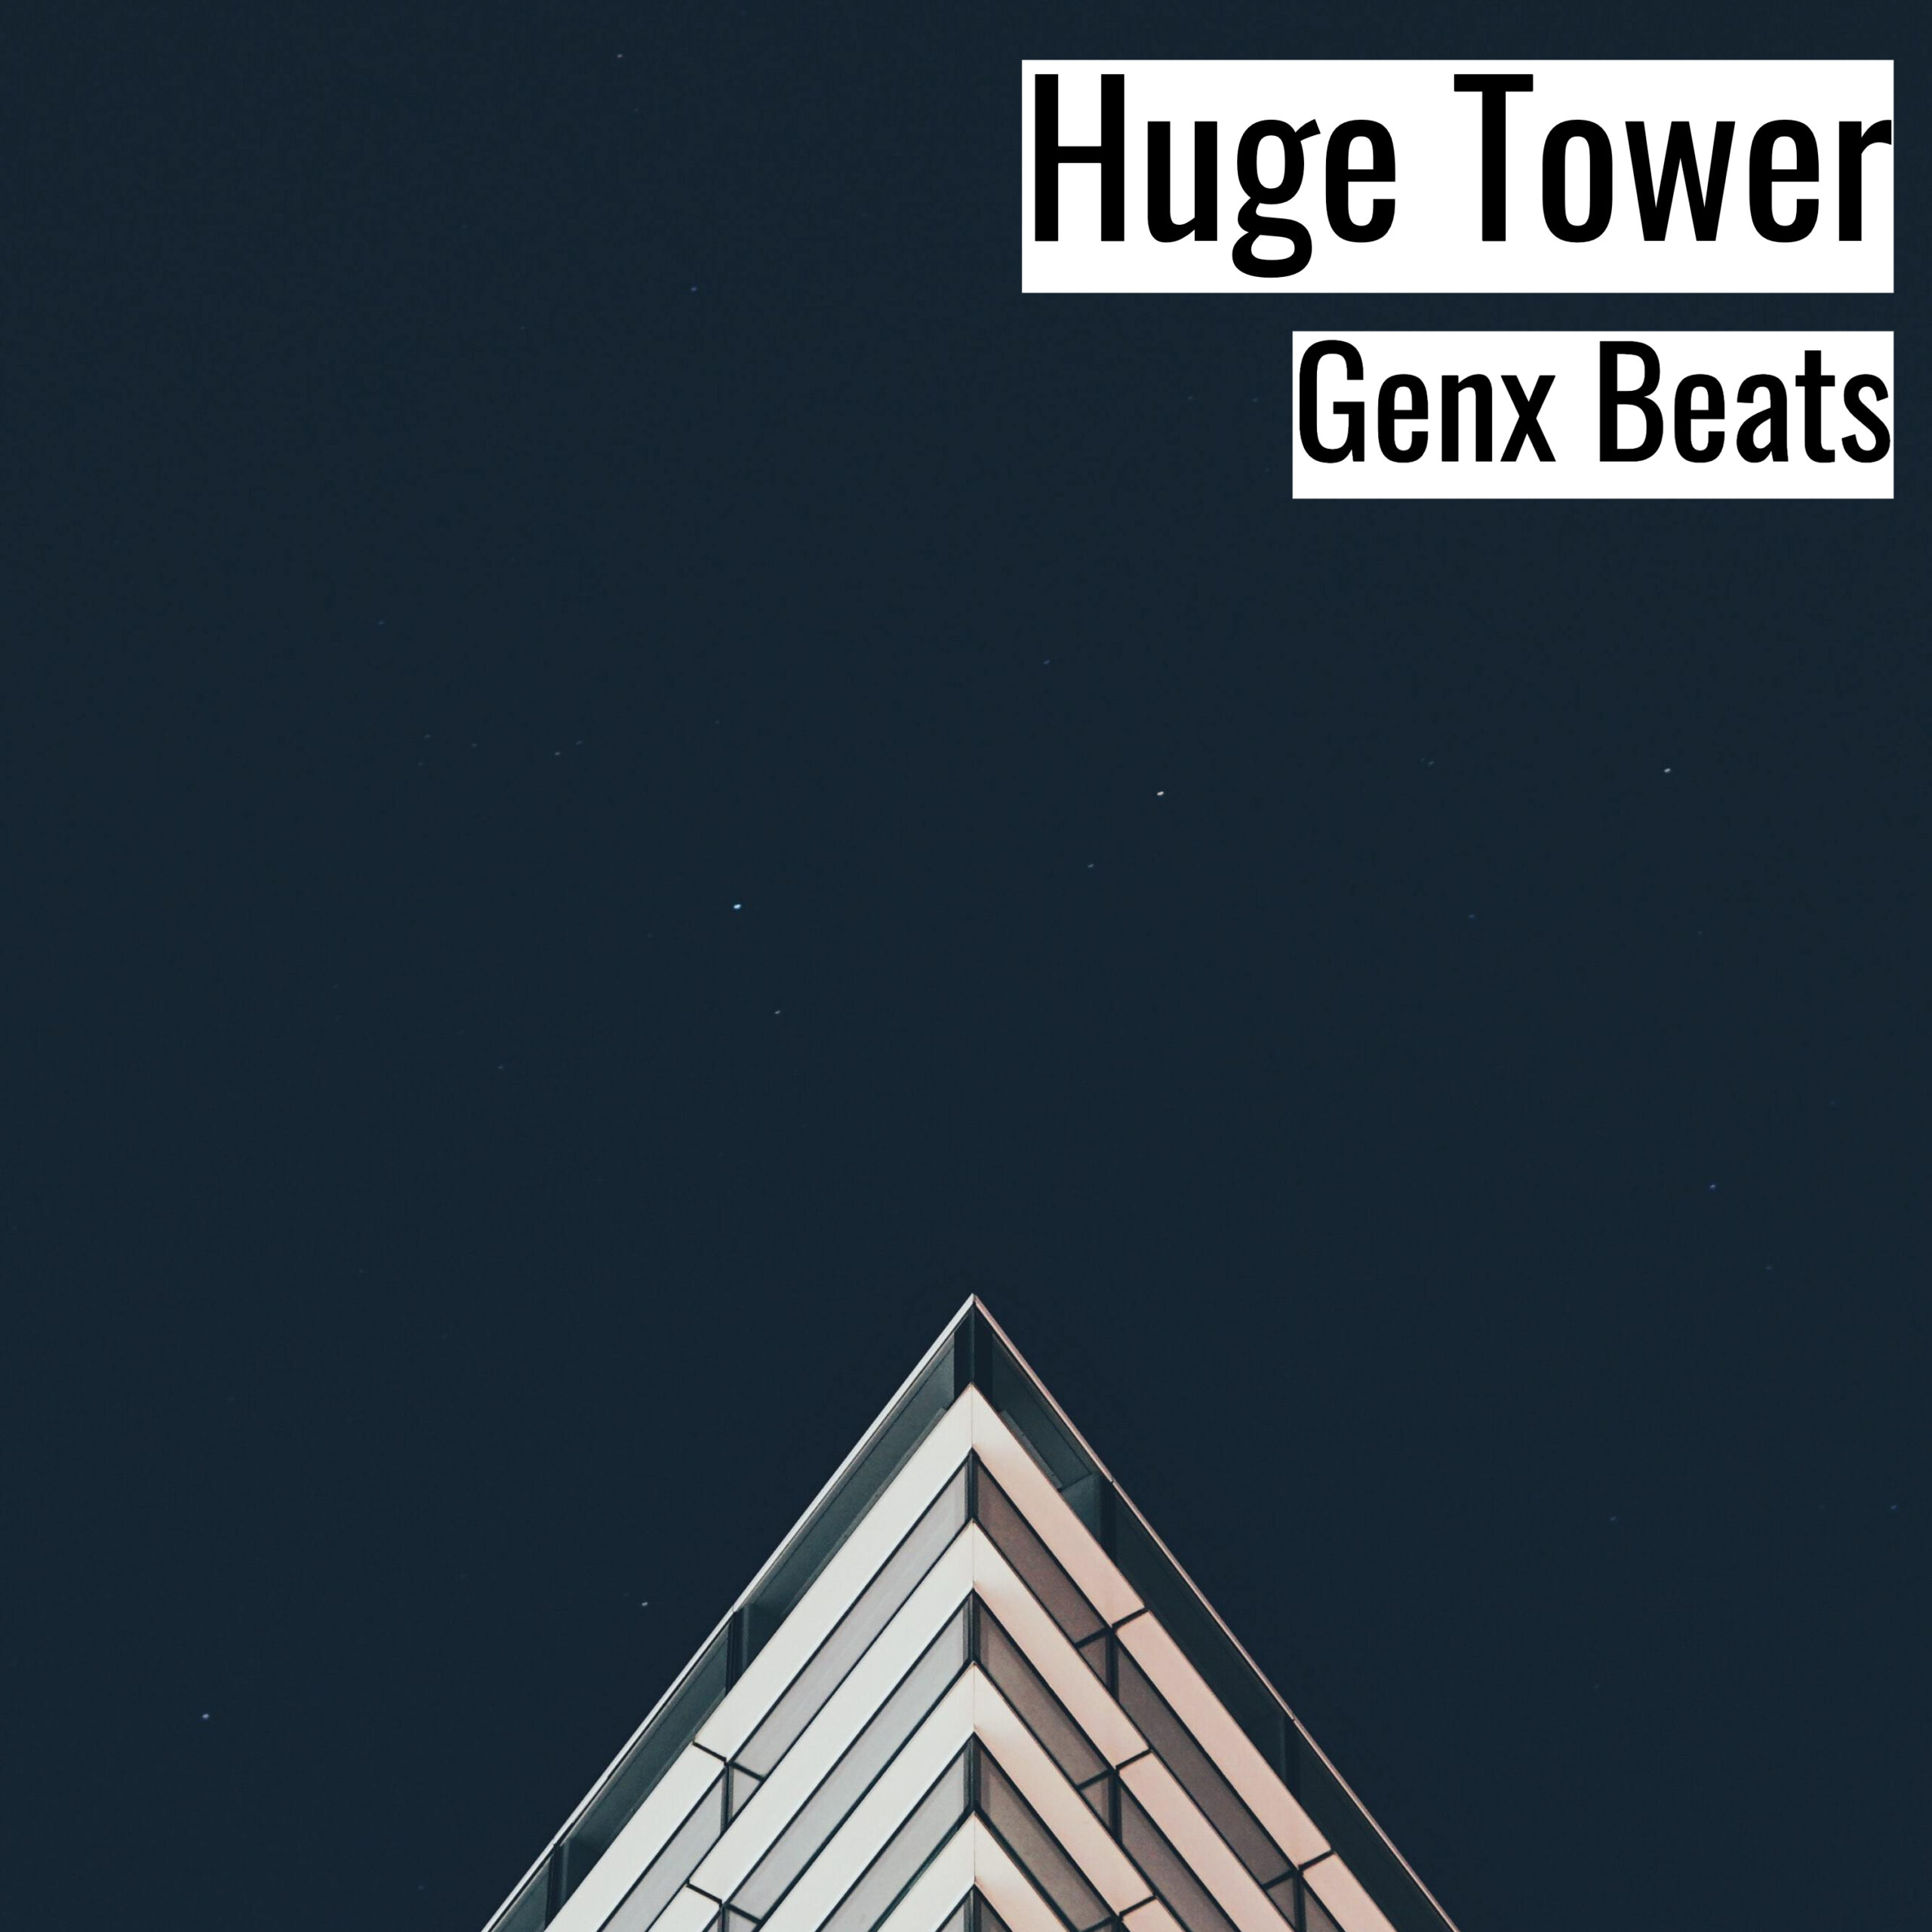 Huge Tower scaled